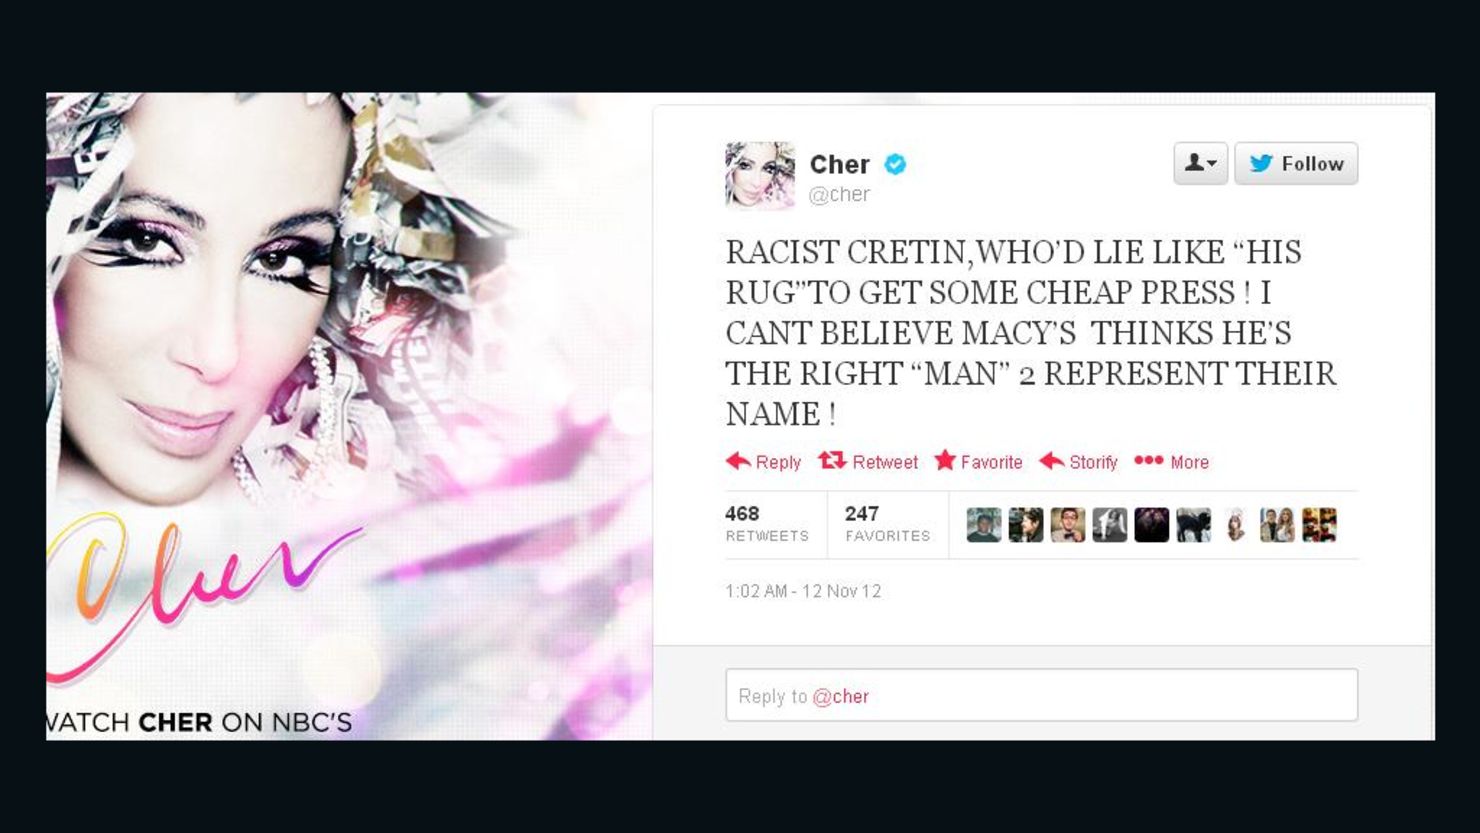 Cher didn't mince words, or spare the Caps Lock key, when taking a shot at Donald Trump on Twitter last year.